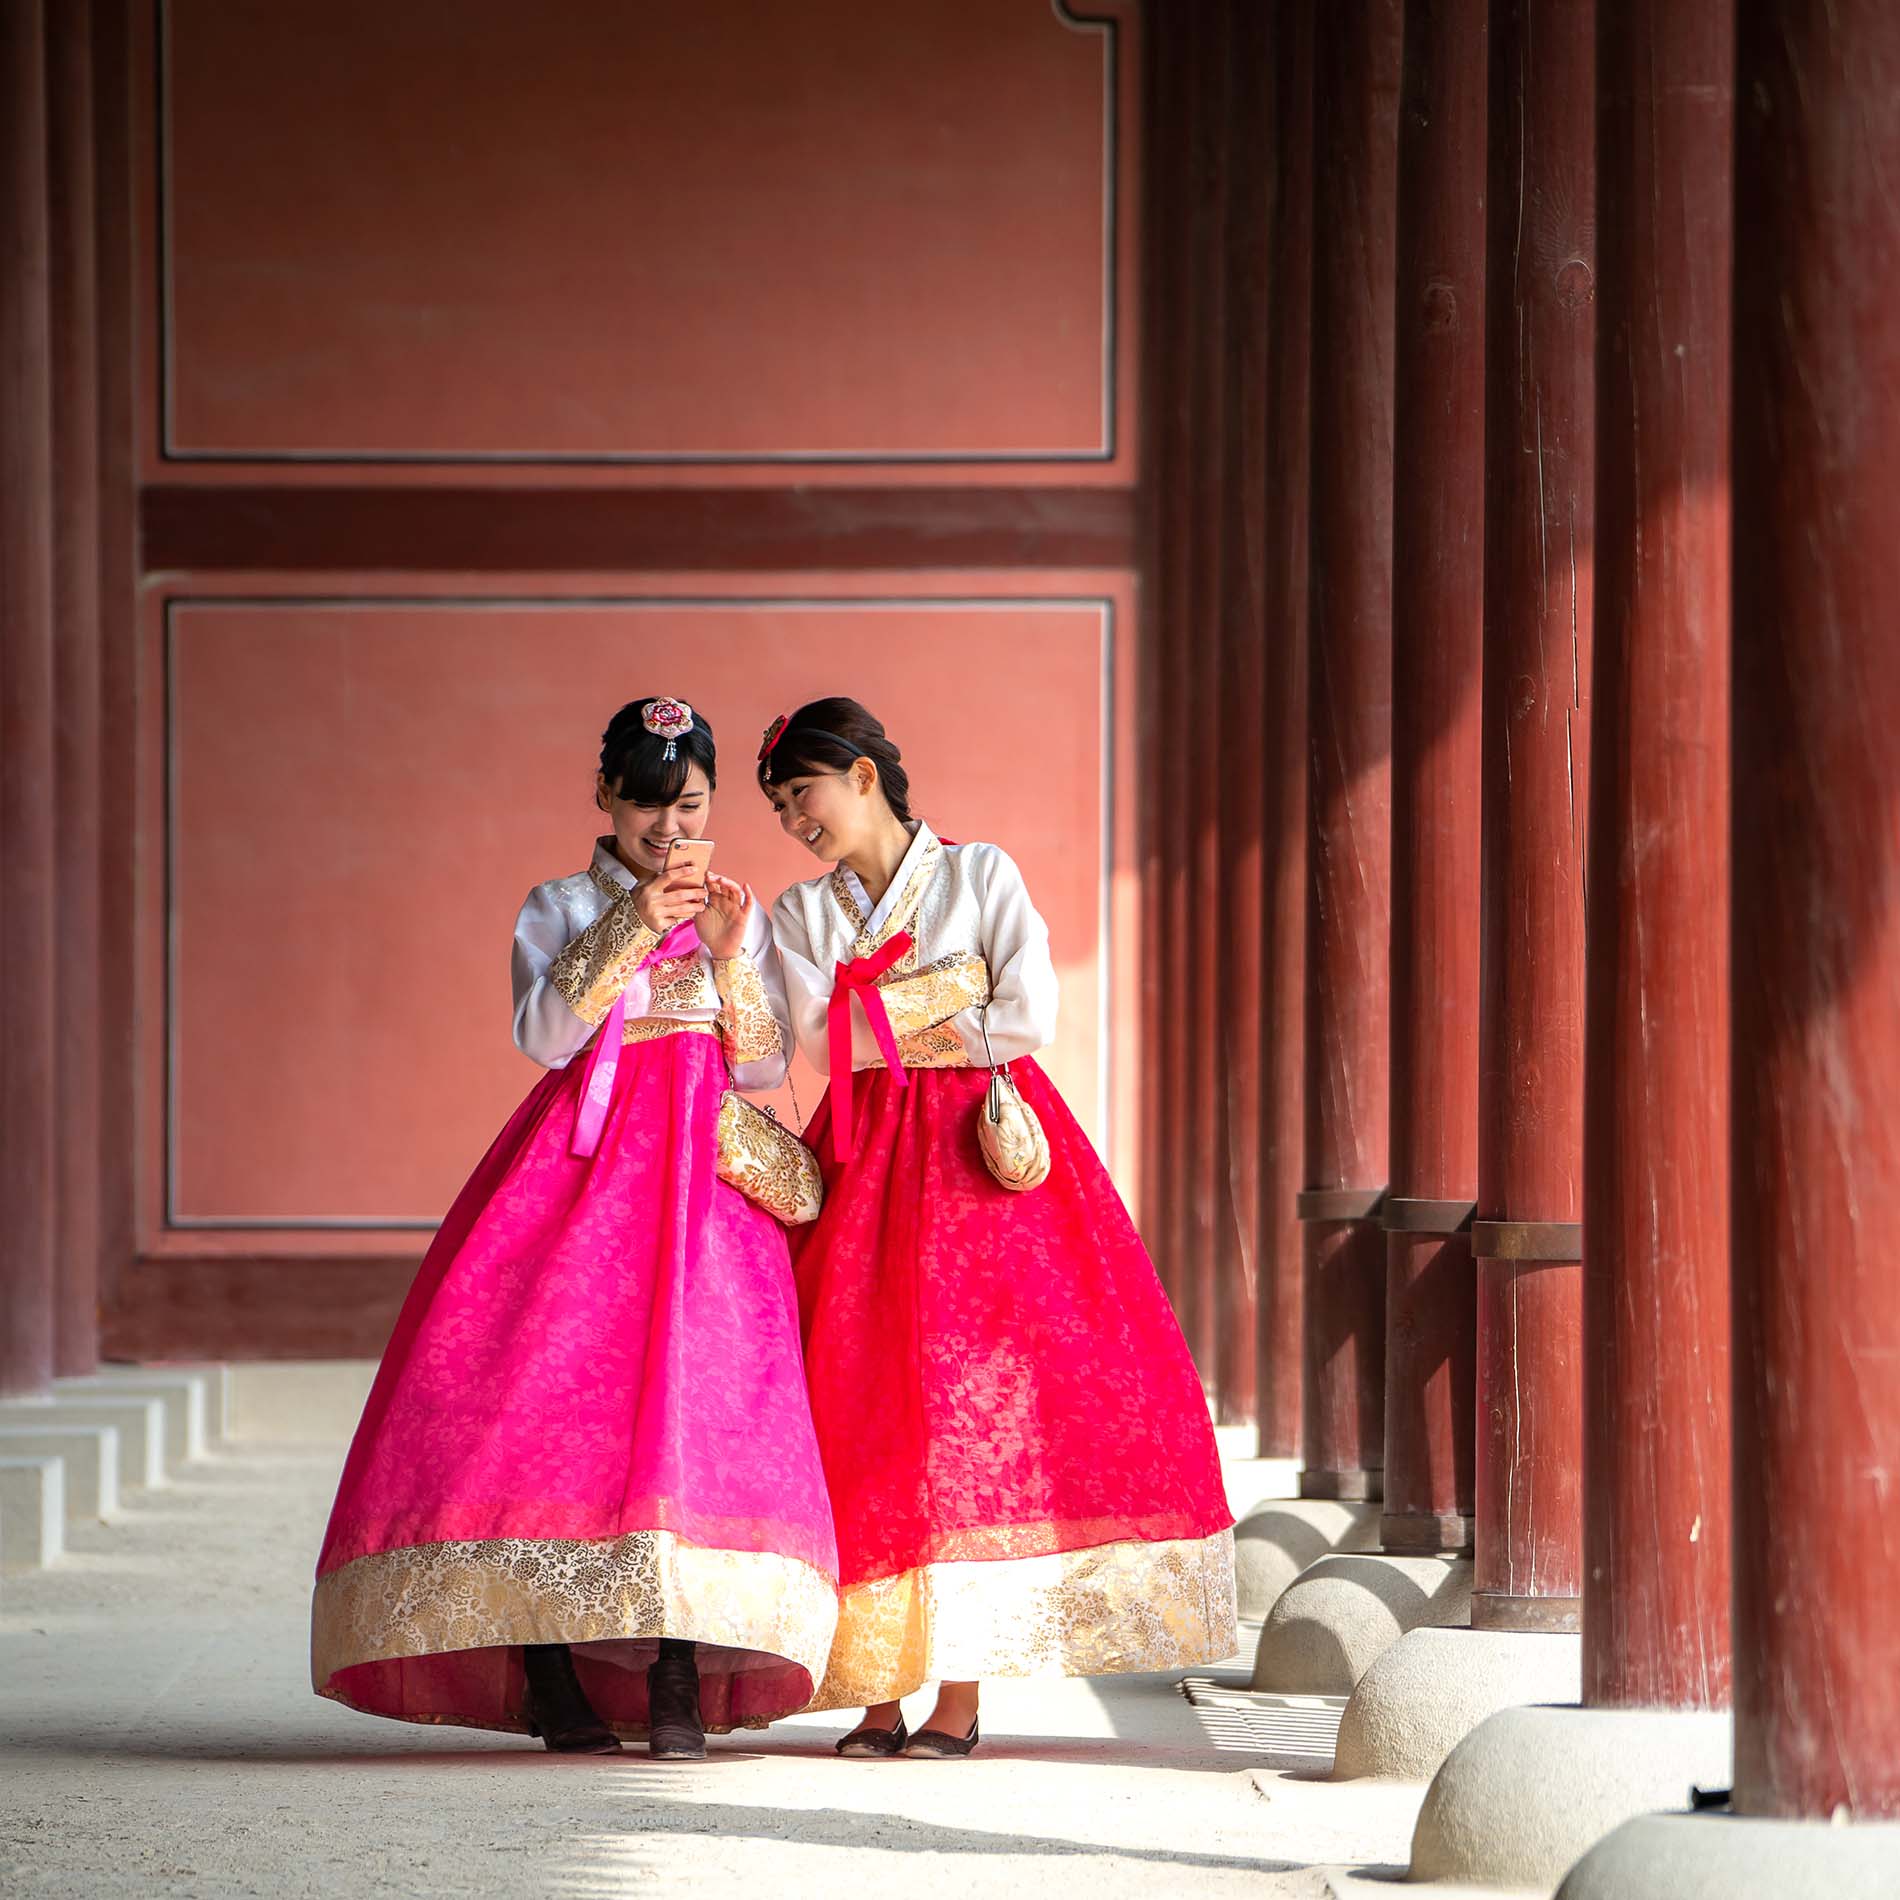 Two people wearing long gowns with gold collars, cuffs and trim and pink or red skirts stand looking at a cell phone and smiling on a wide path between two rows of tall red wooden pillars with a red wall behind them.